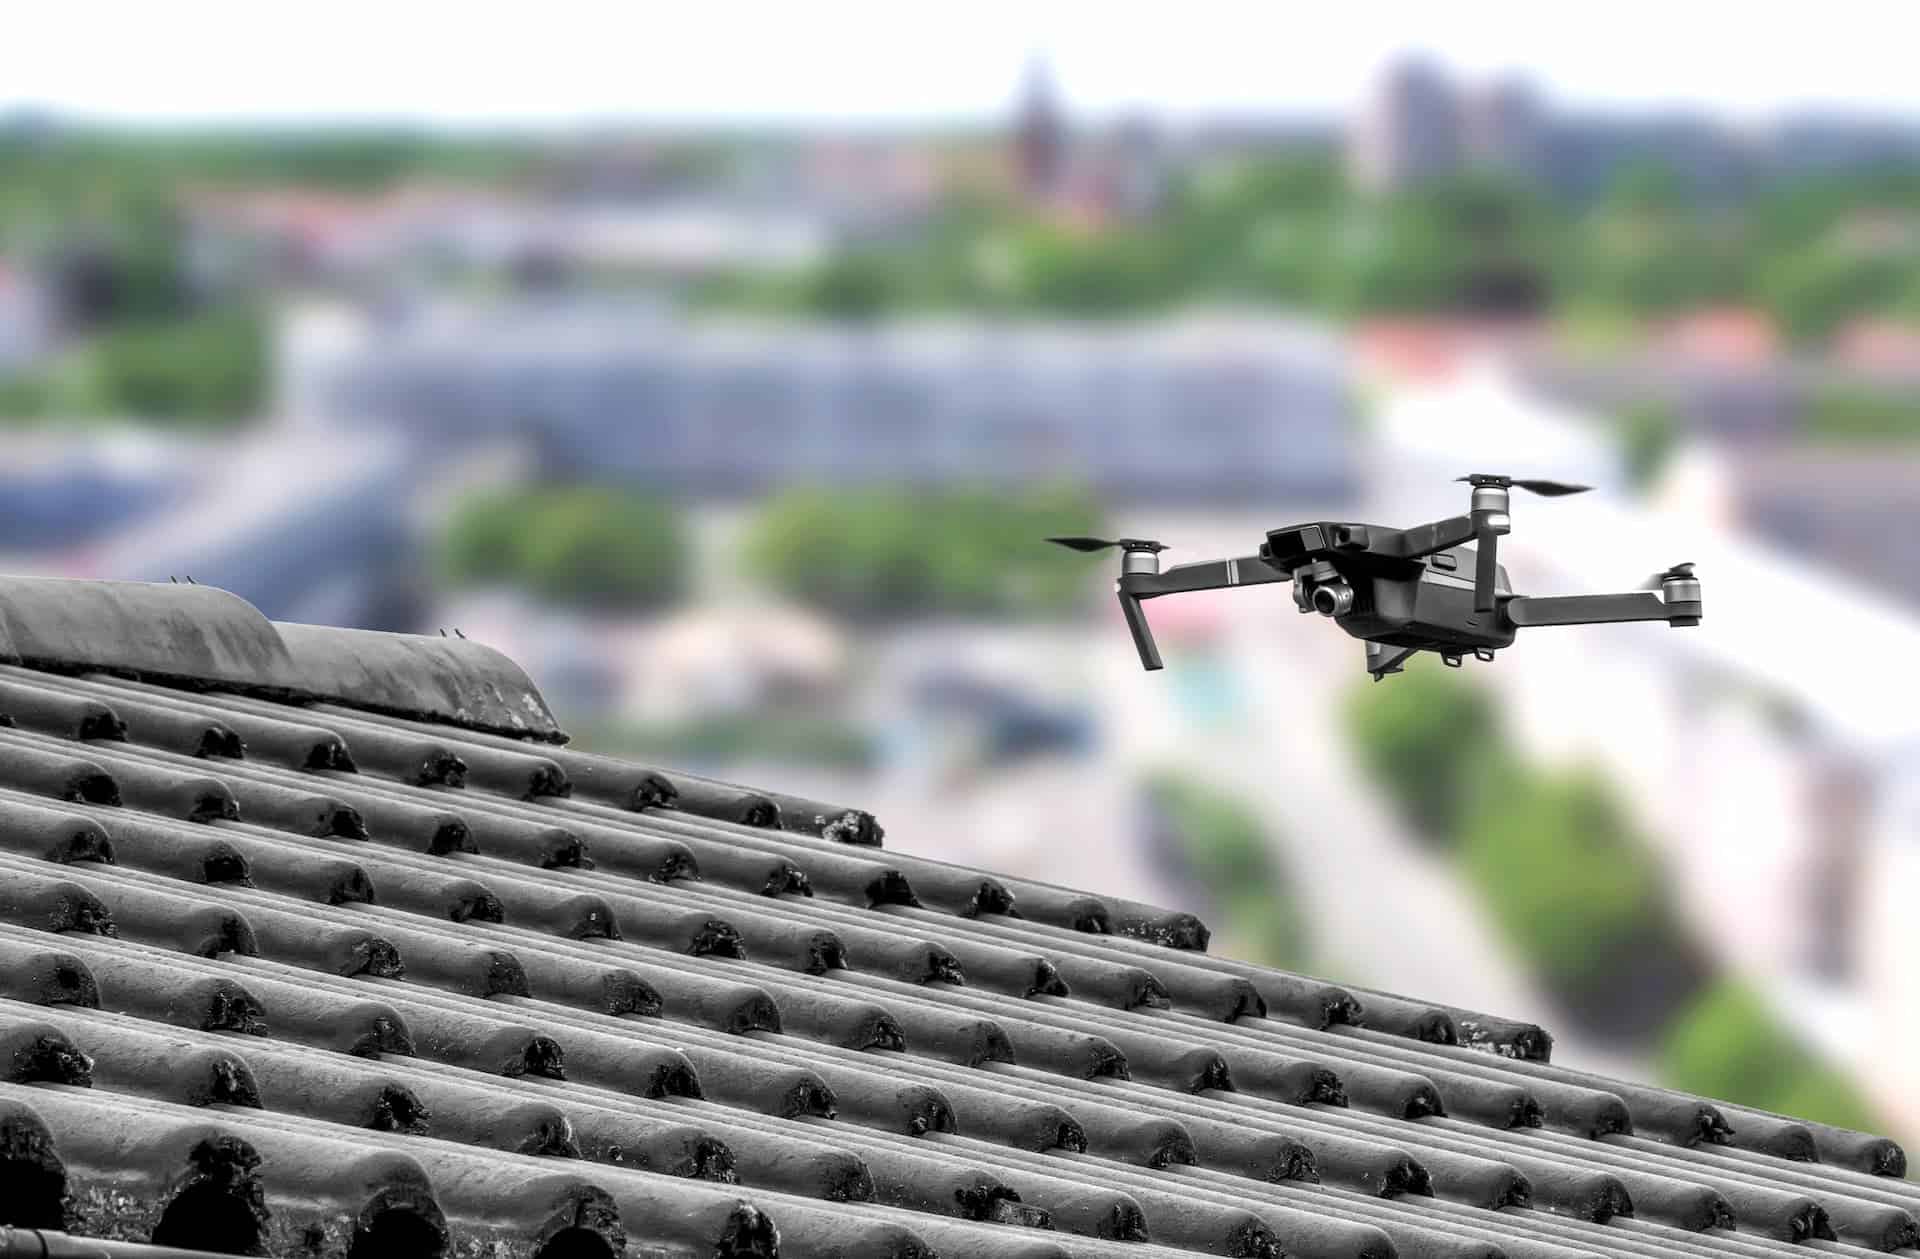 How To Do A Roof Inspection With A Drone